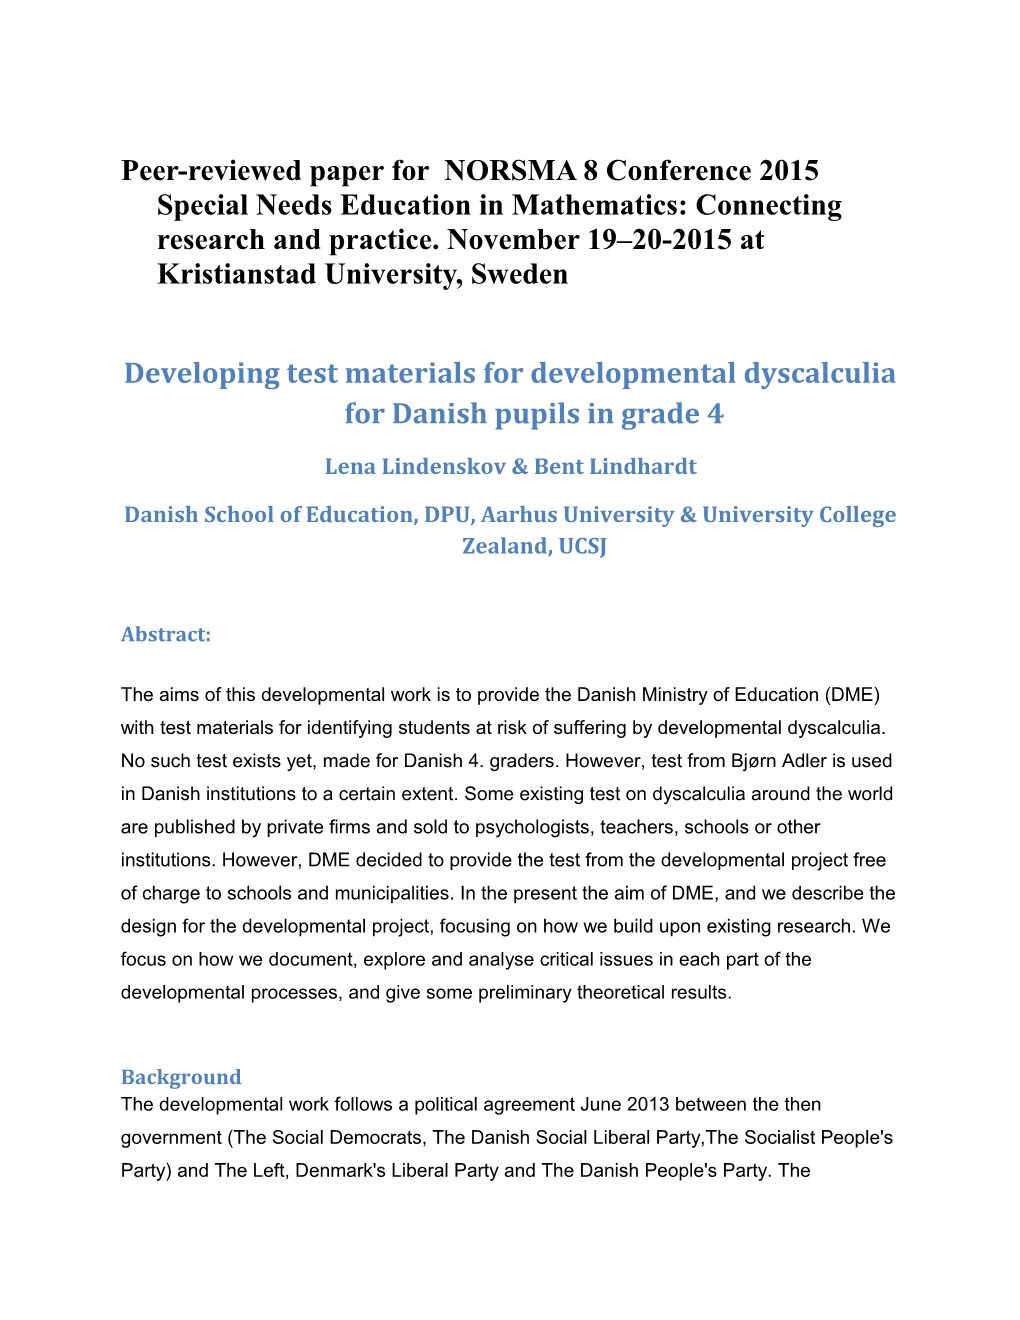 Developing Test Materials for Developmental Dyscalculia for Danish Pupils in Grade 4